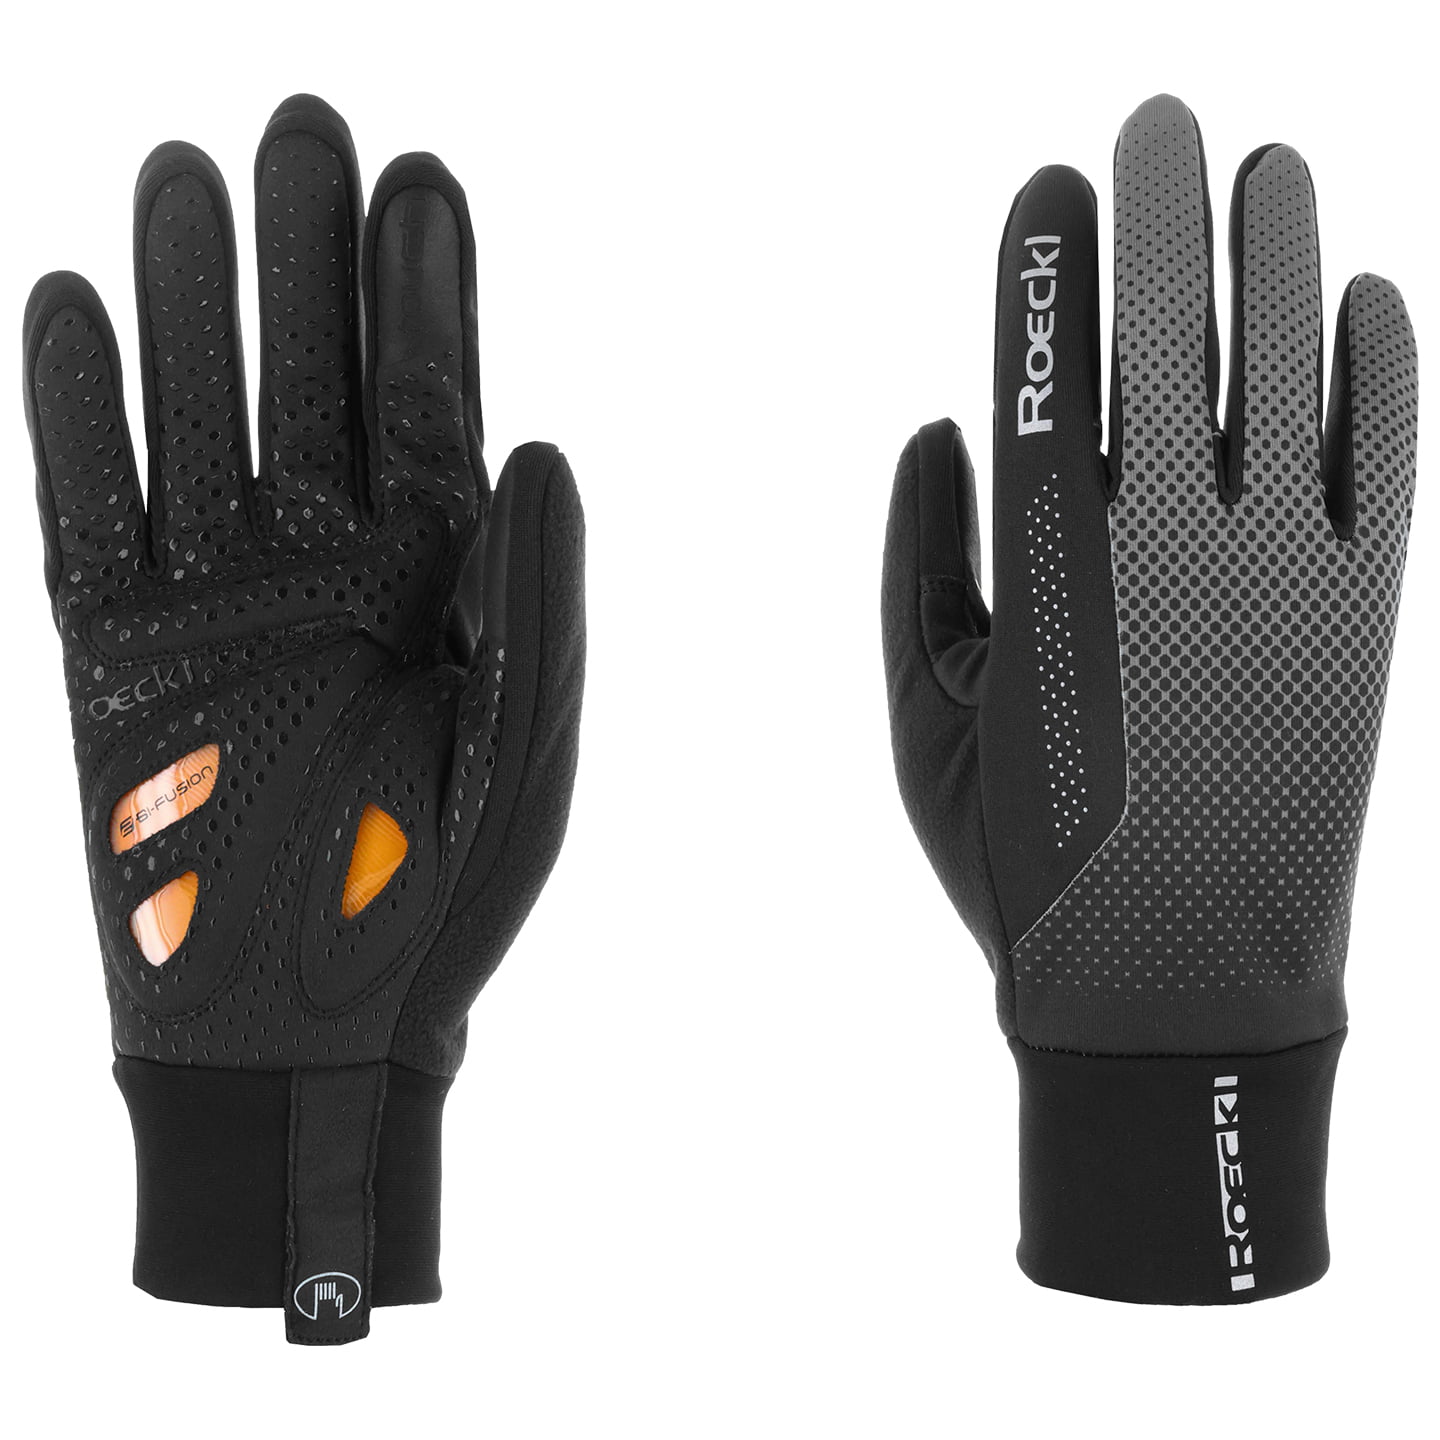 ROECKL Rimbach Winter Gloves Winter Cycling Gloves, for men, size 10,5, Bike gloves, Bike clothing